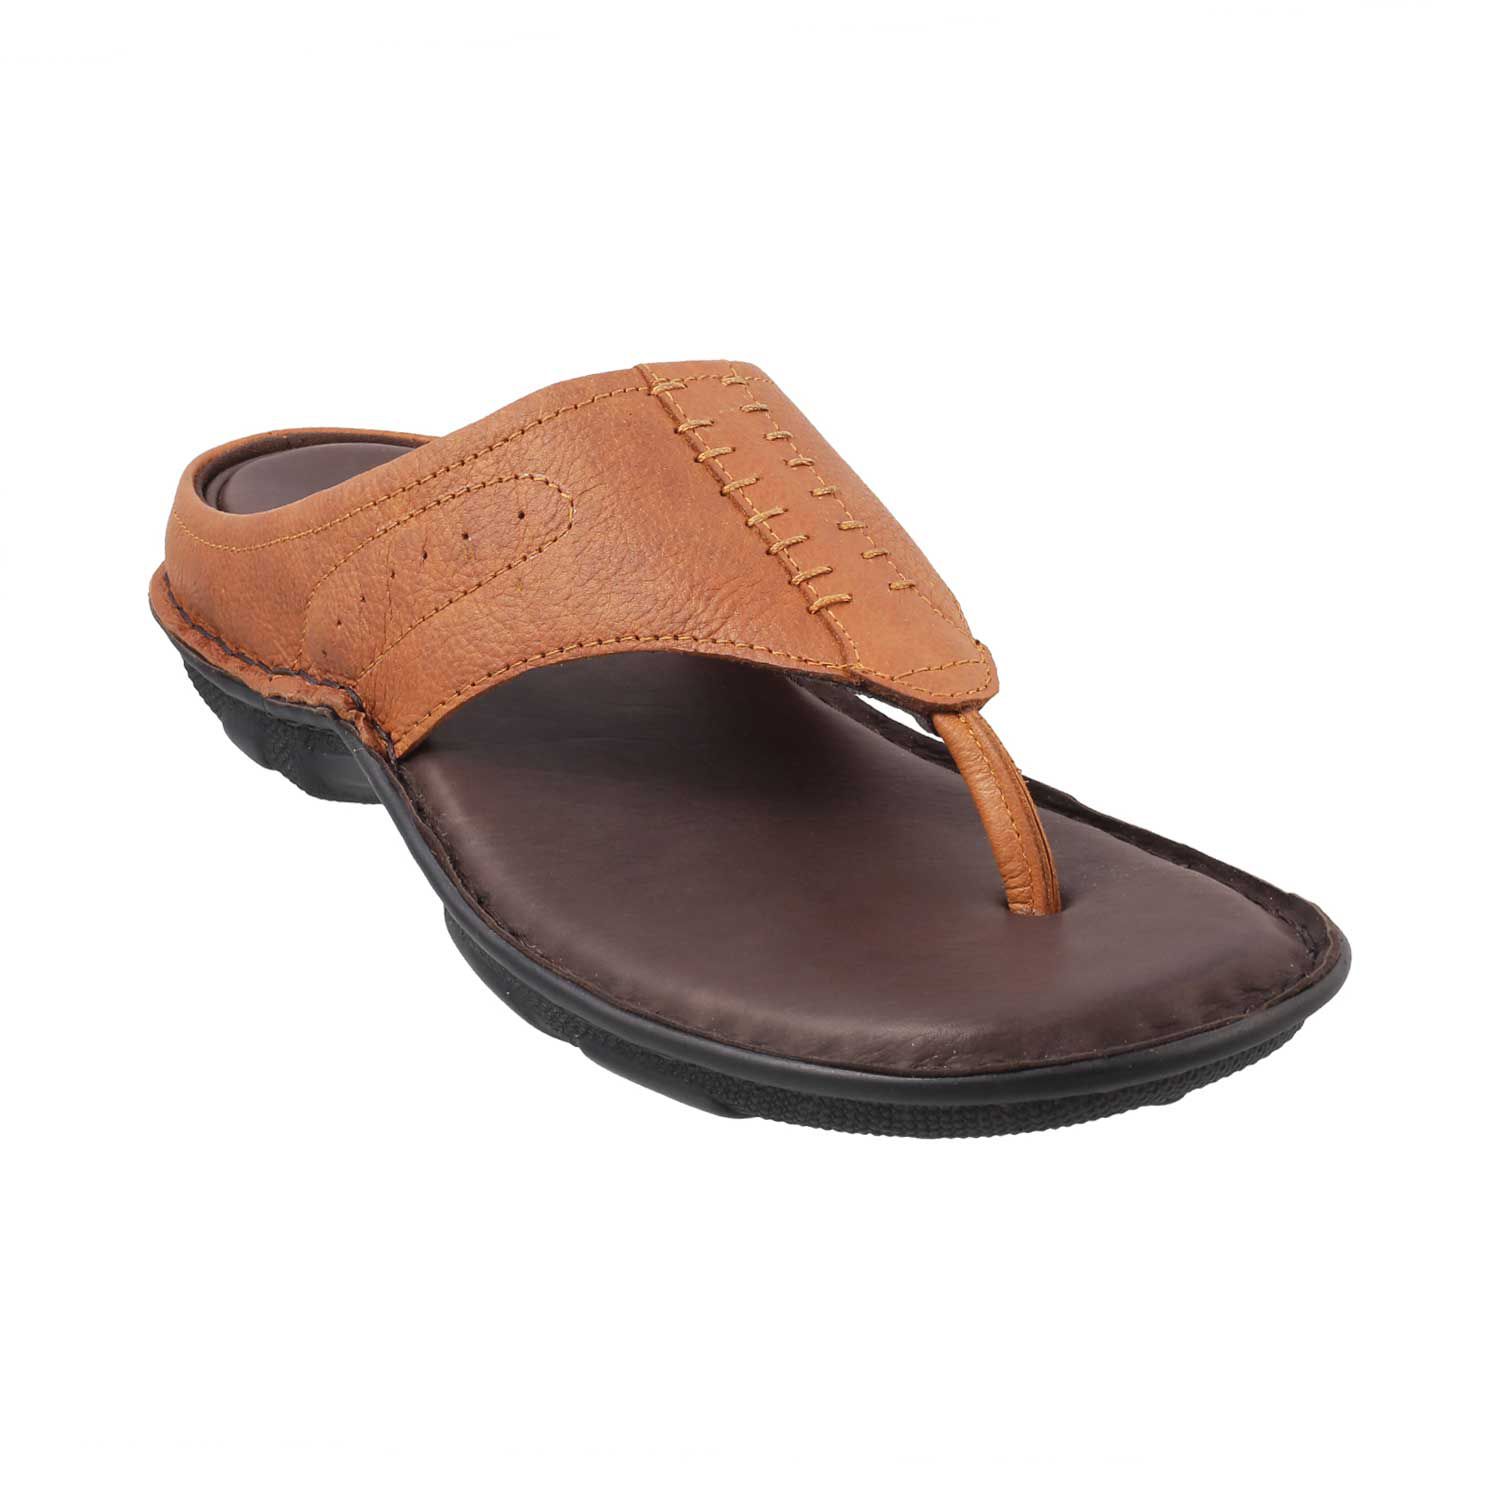 mochi leather slippers